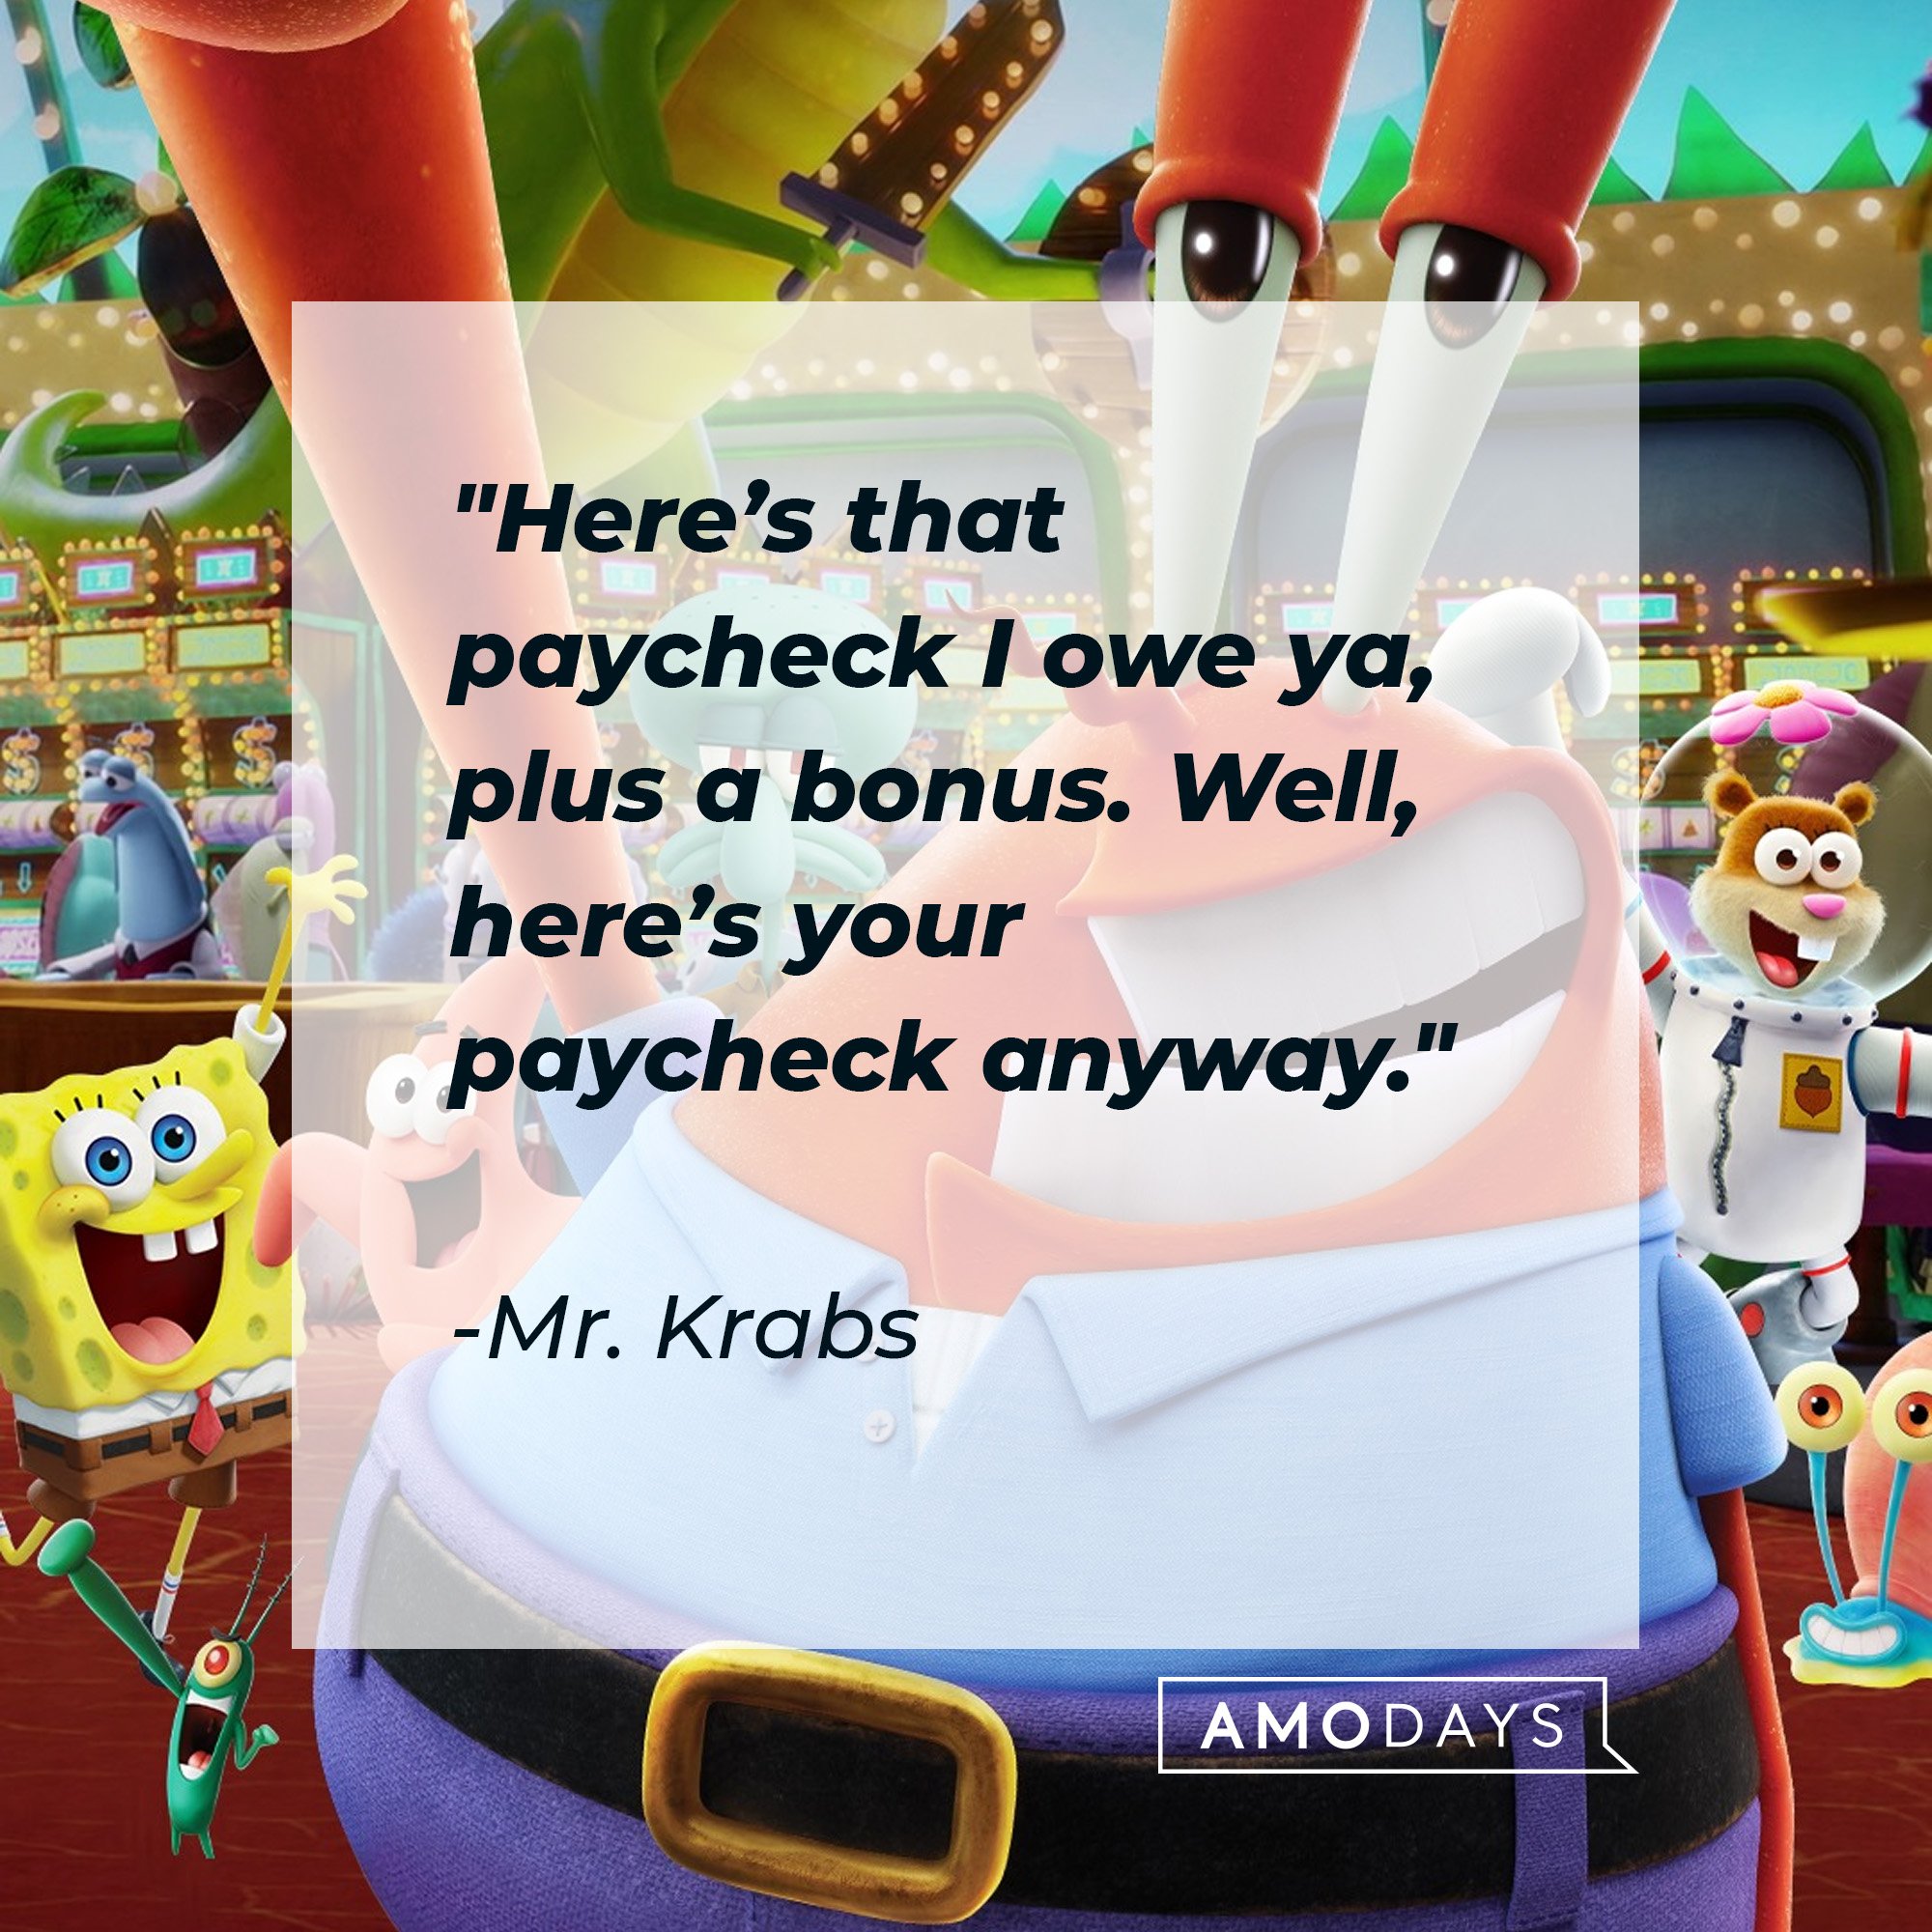 Mr. Krabs's quote: "Here’s that paycheck I owe ya, plus a bonus. Well, here’s your paycheck anyway." | Image: AmoDays 